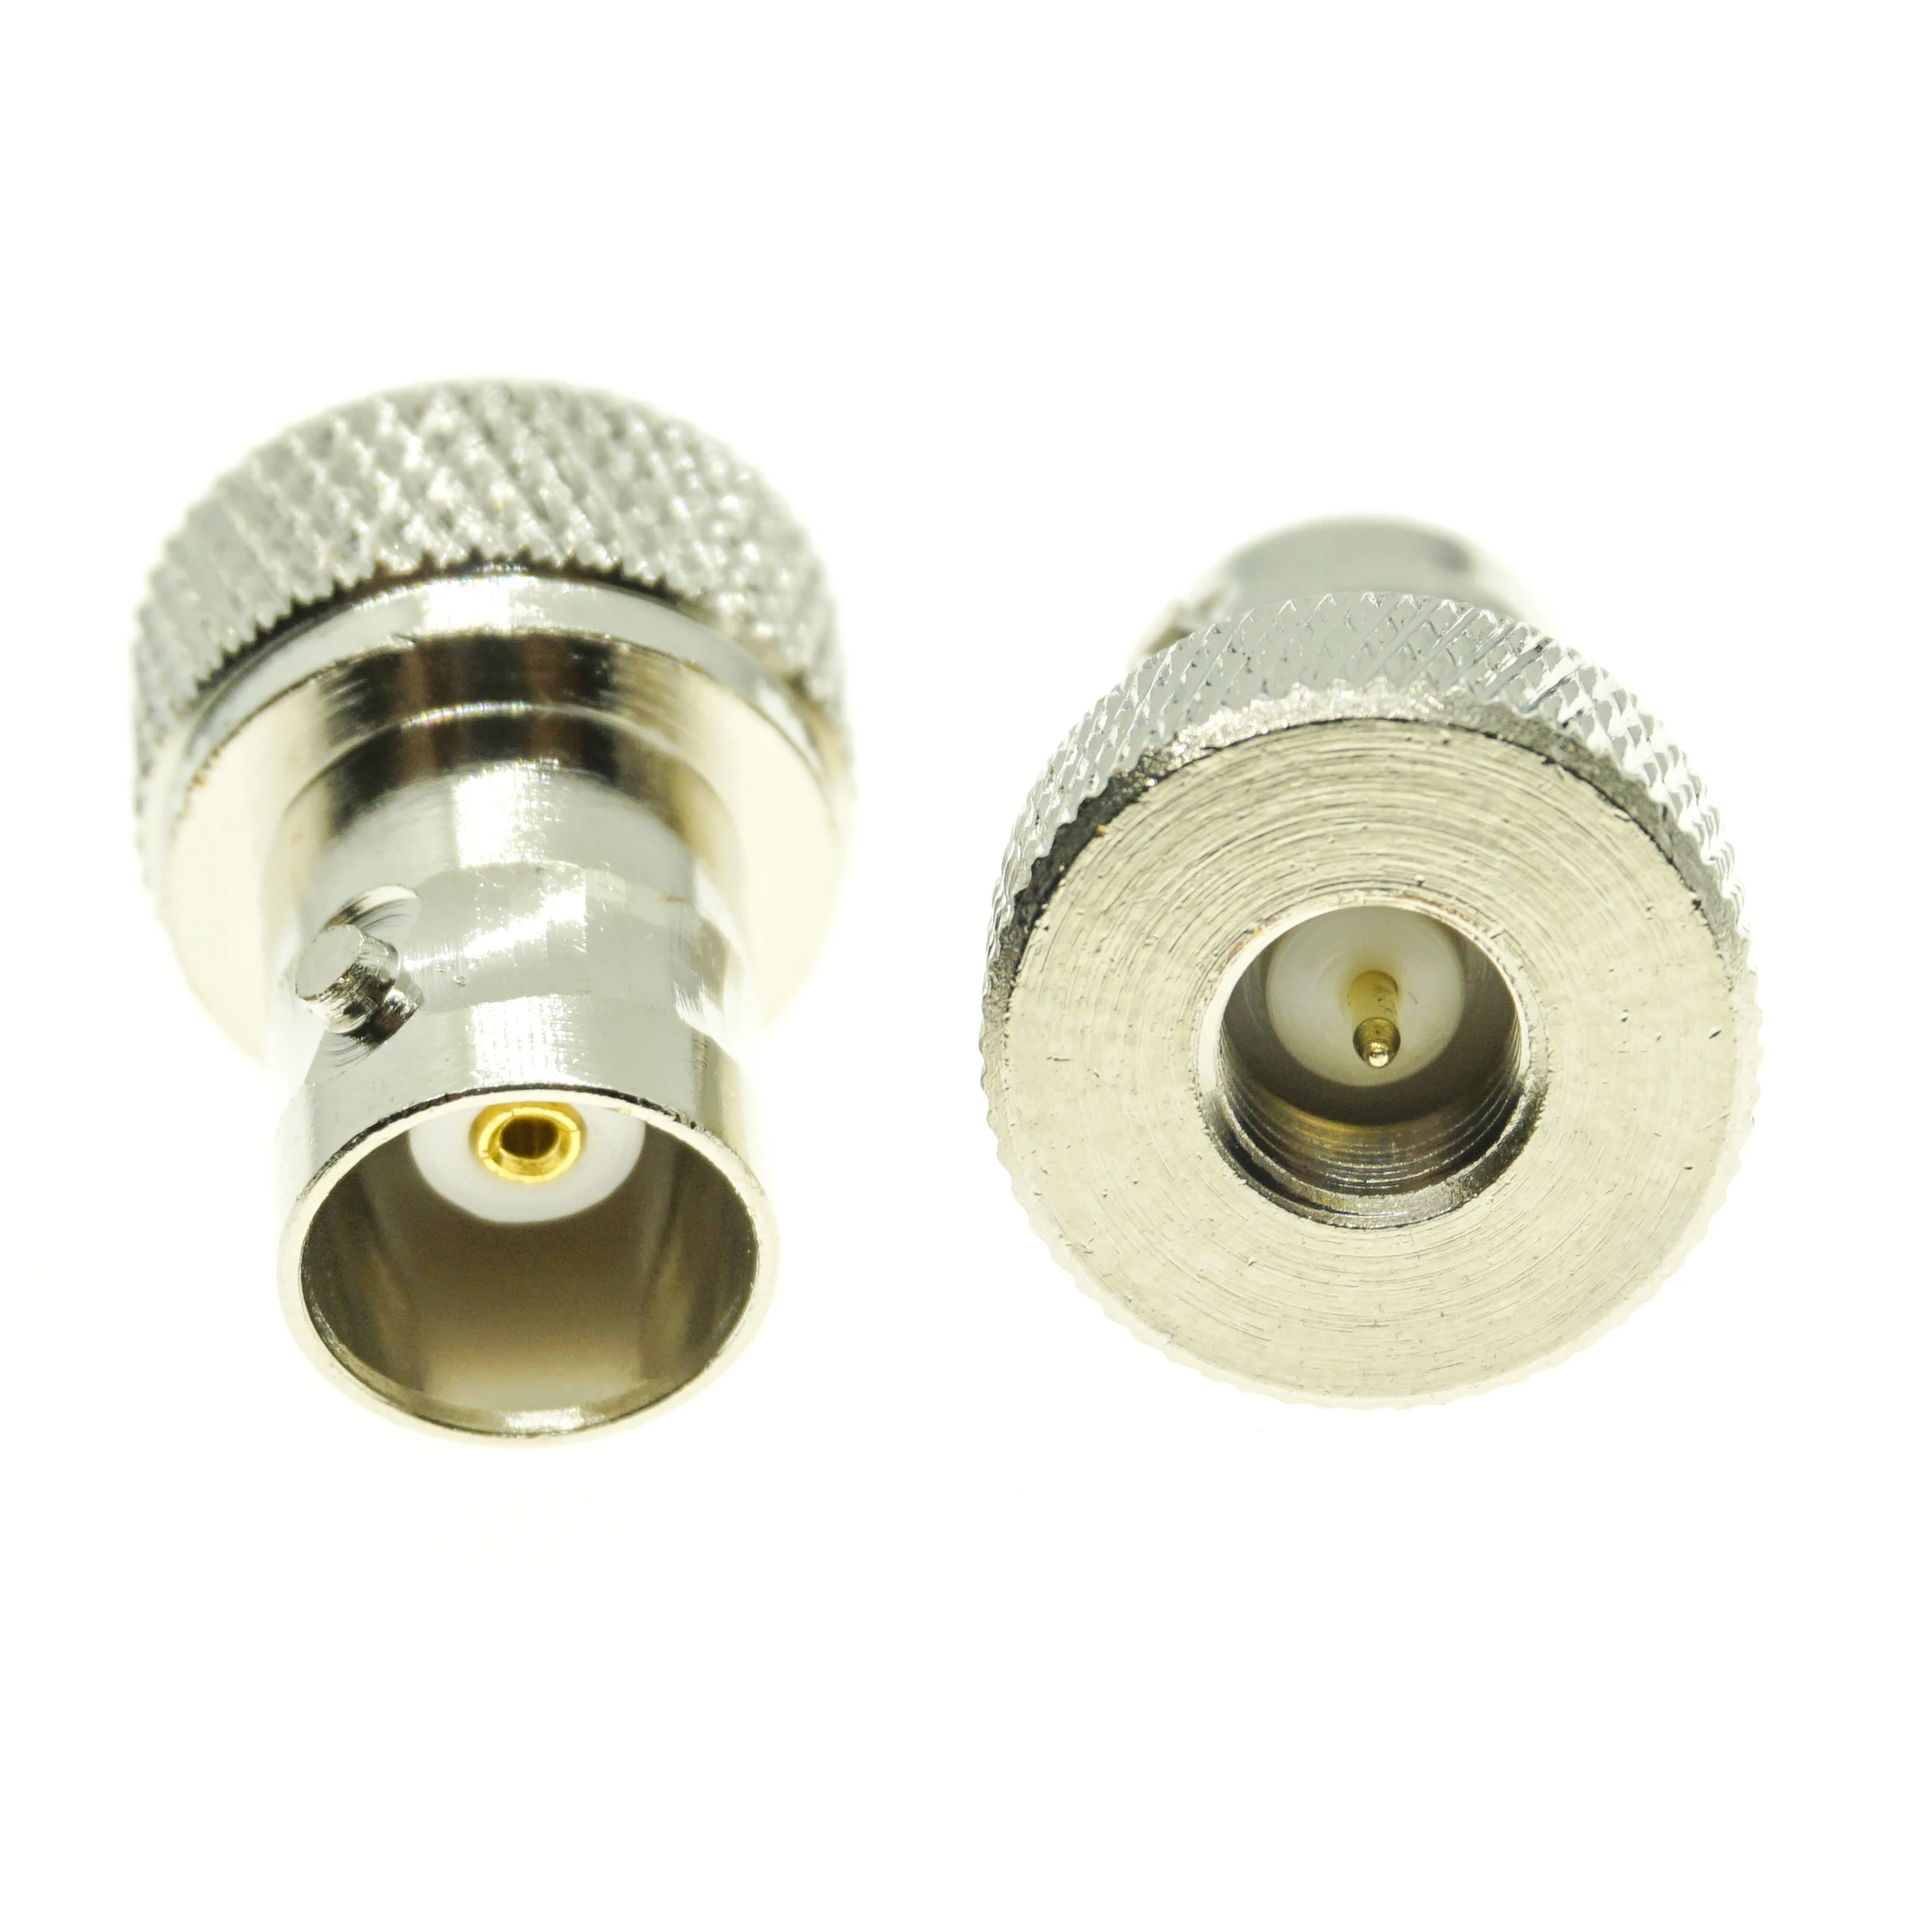 

BNC To SMA Connector Antenna BNC Female to SMA Male Plug Nickel Plated Q9 Straight Coaxial RF Adapters for Vertex Icom Kenwood